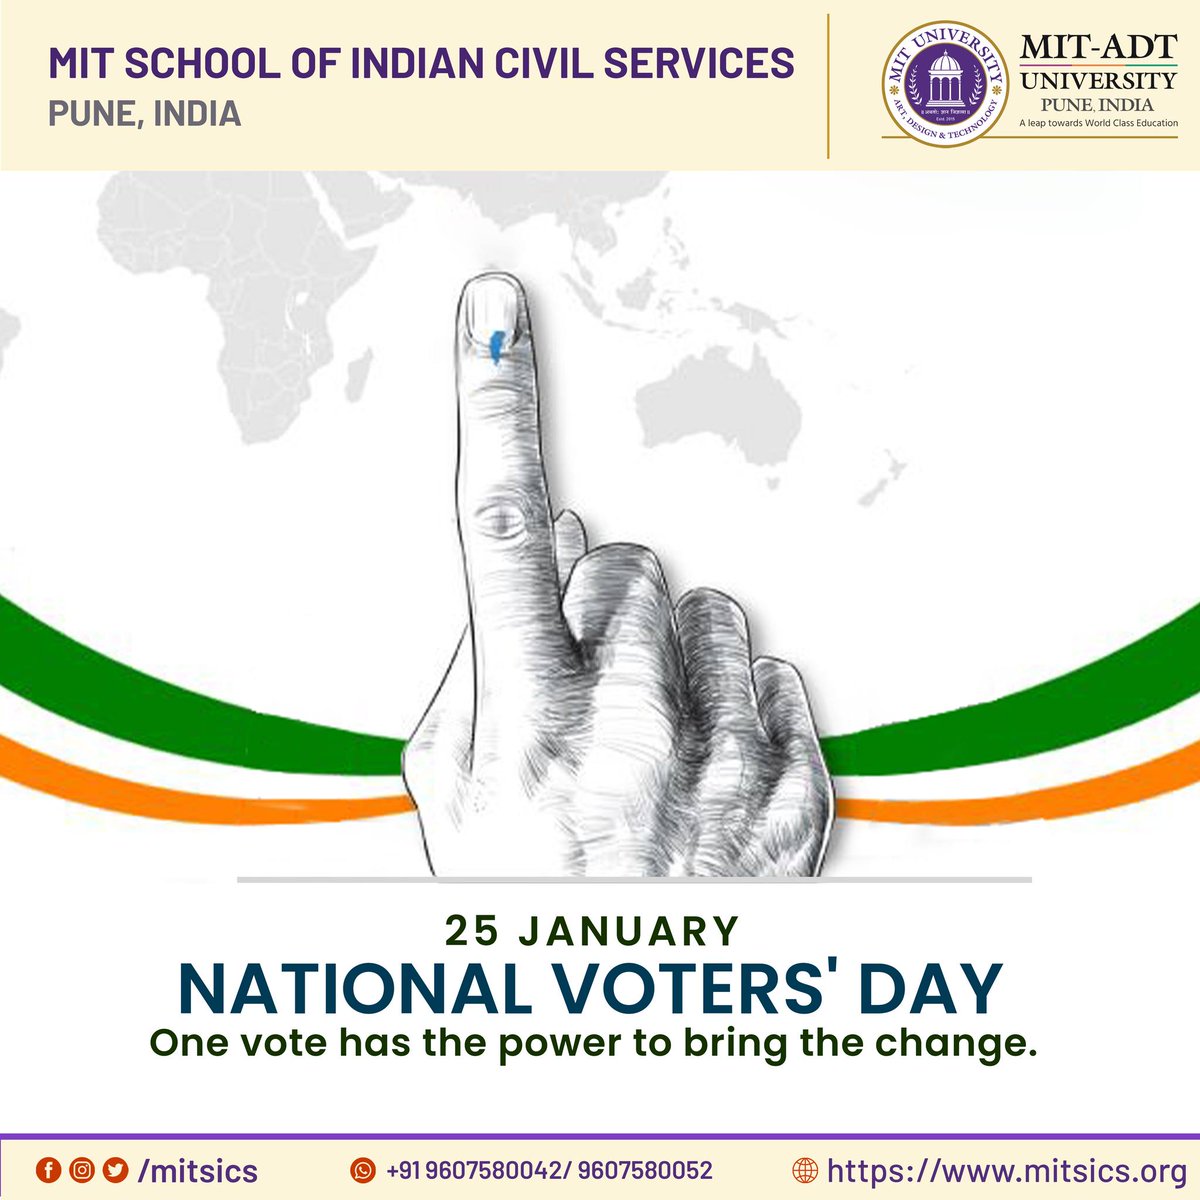 “Voting is not only our right - it is our power”.
Using our vote, let's build a better and brighter future together. Happy National Voters Day to all of you.

#NationalVotersDay #राष्ट्रीय_मतदाता_दिवस #VotingRights #worldclasseducation #mitsics #MITADT